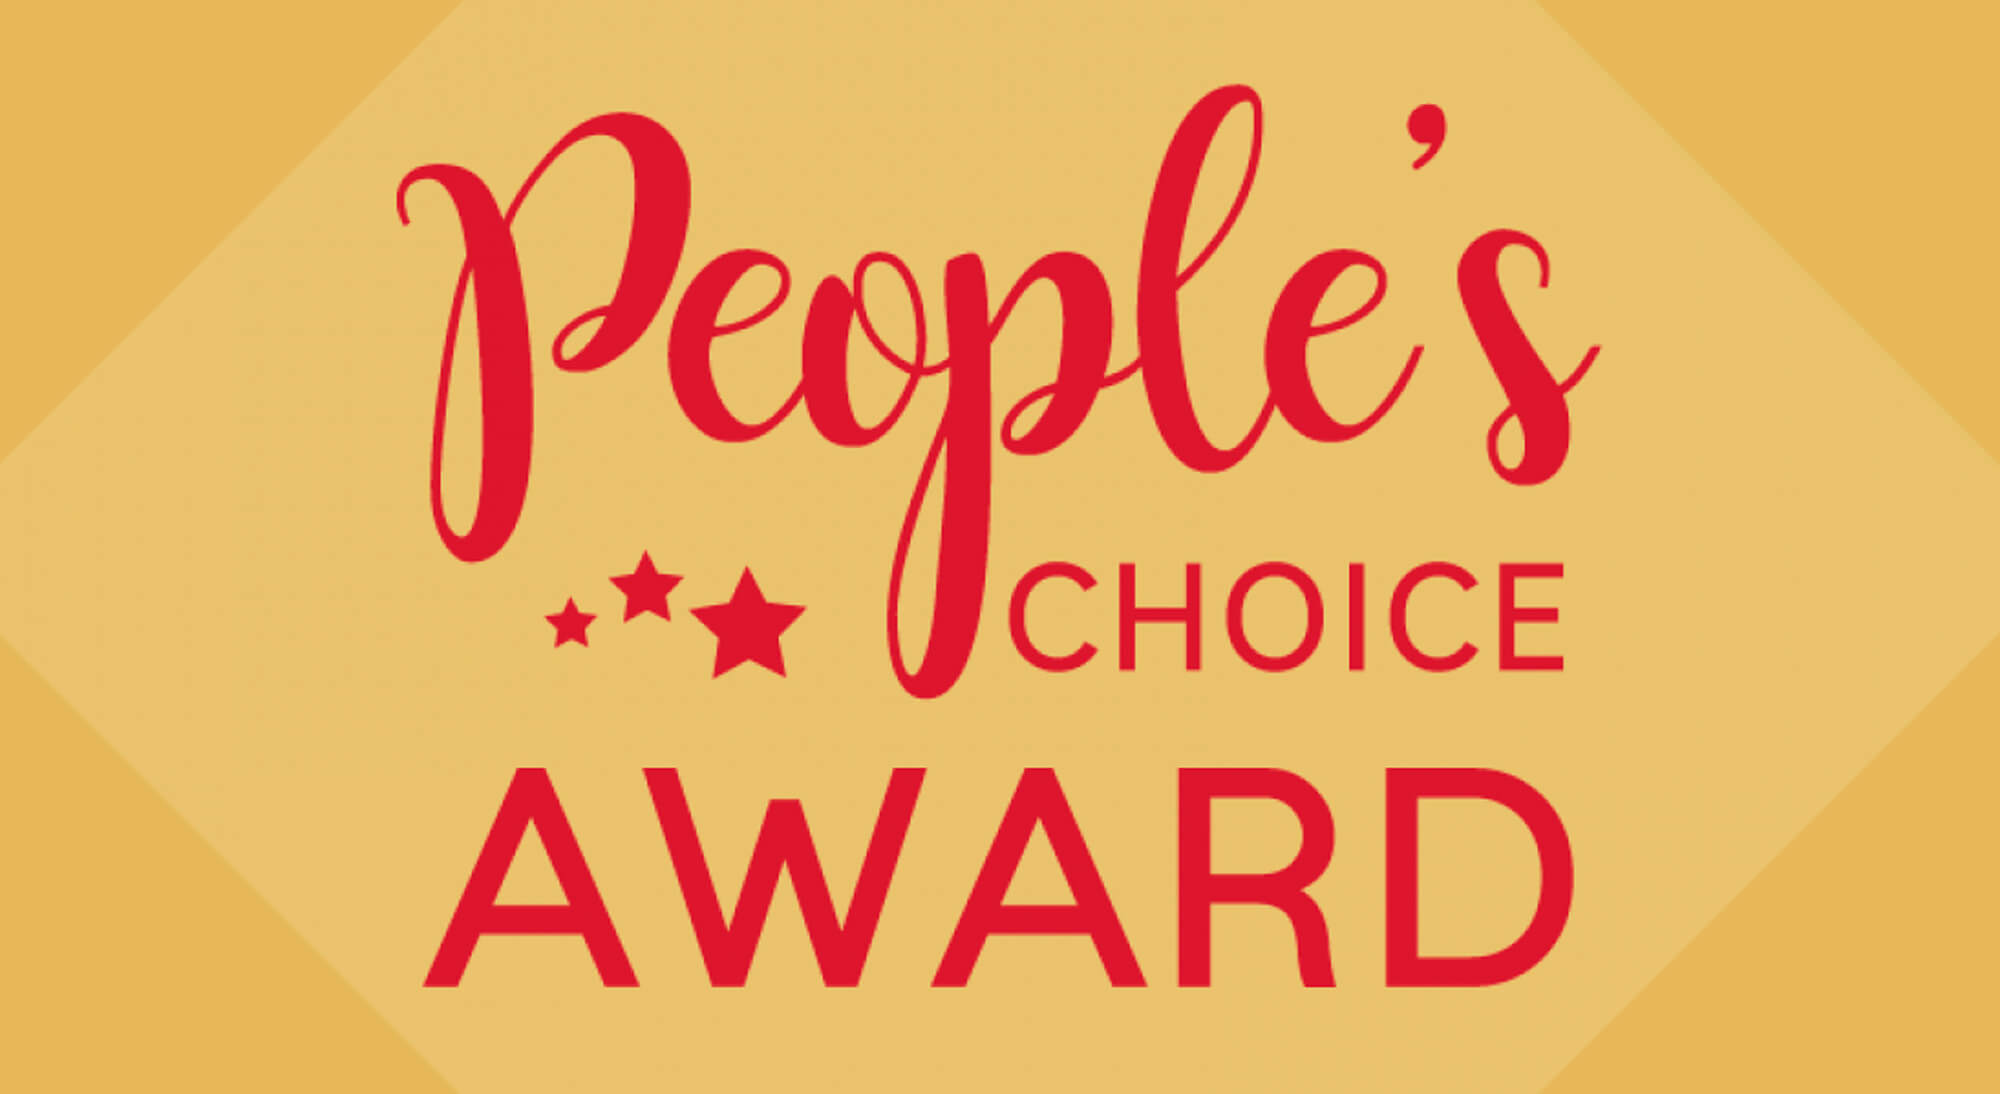 Best Of Peoples choice award Power to the people